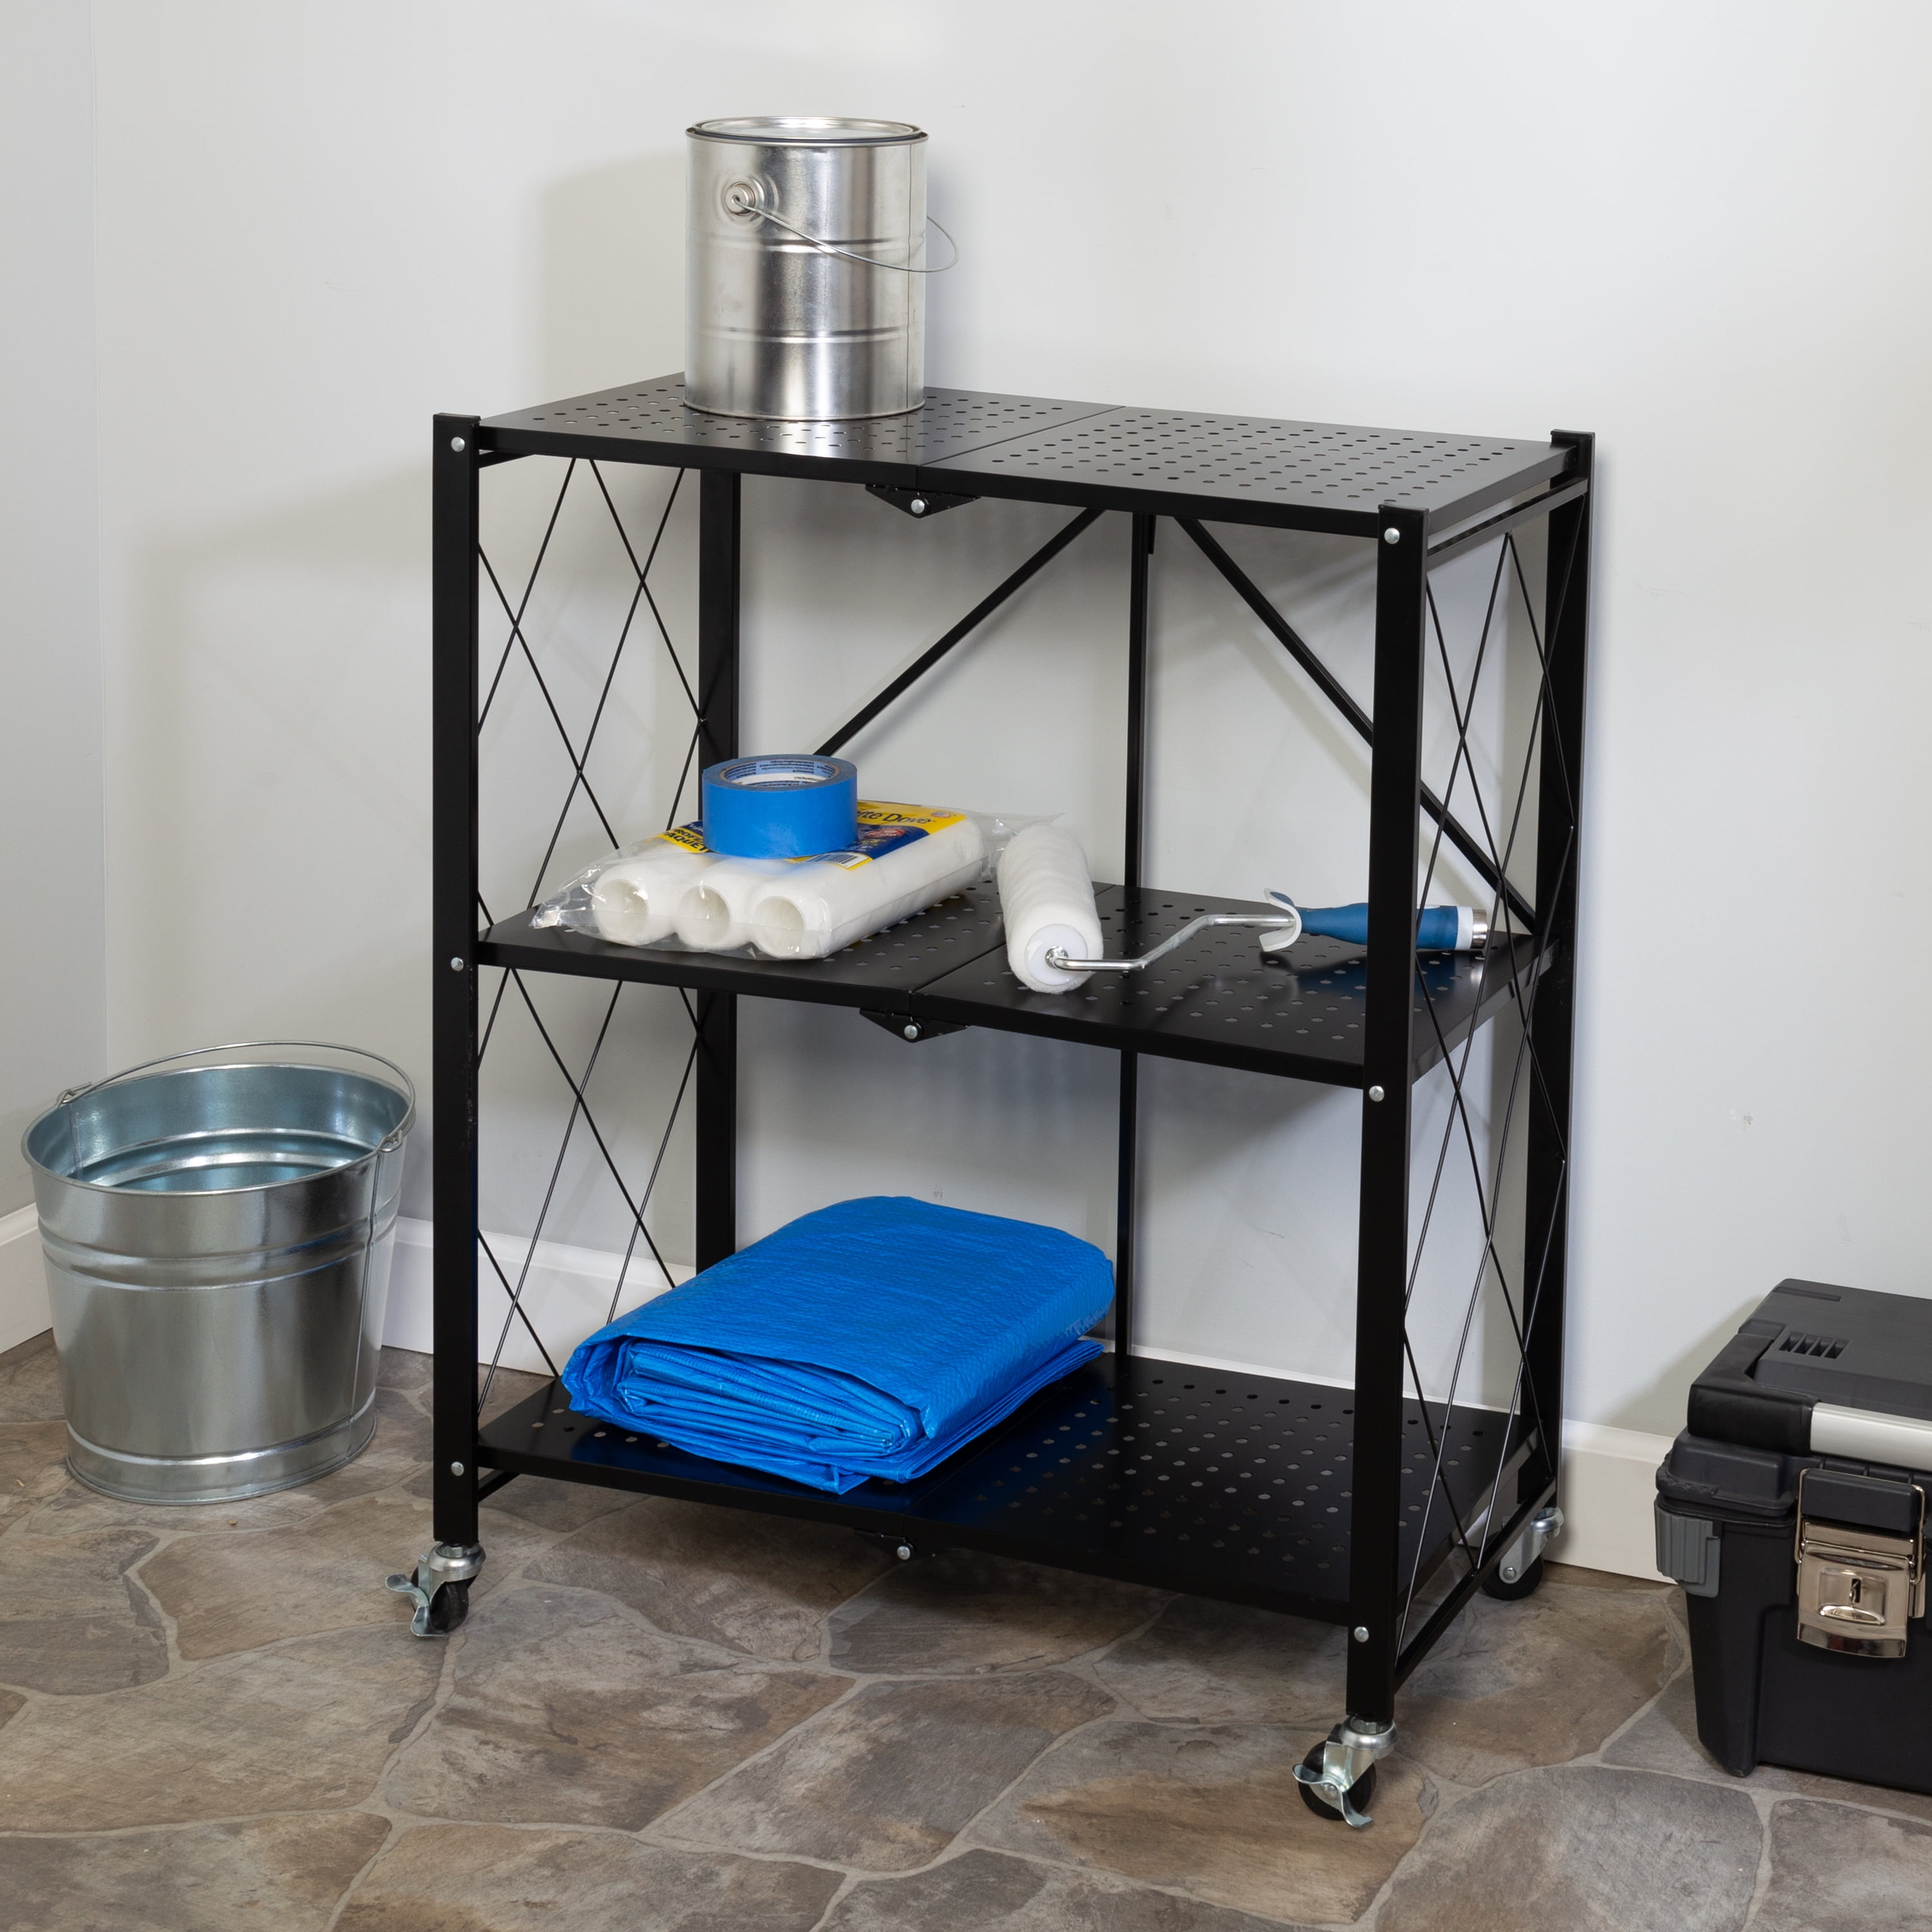 E-Z Roll Wheeled Wire Rack and Dispenser - Compact and Light